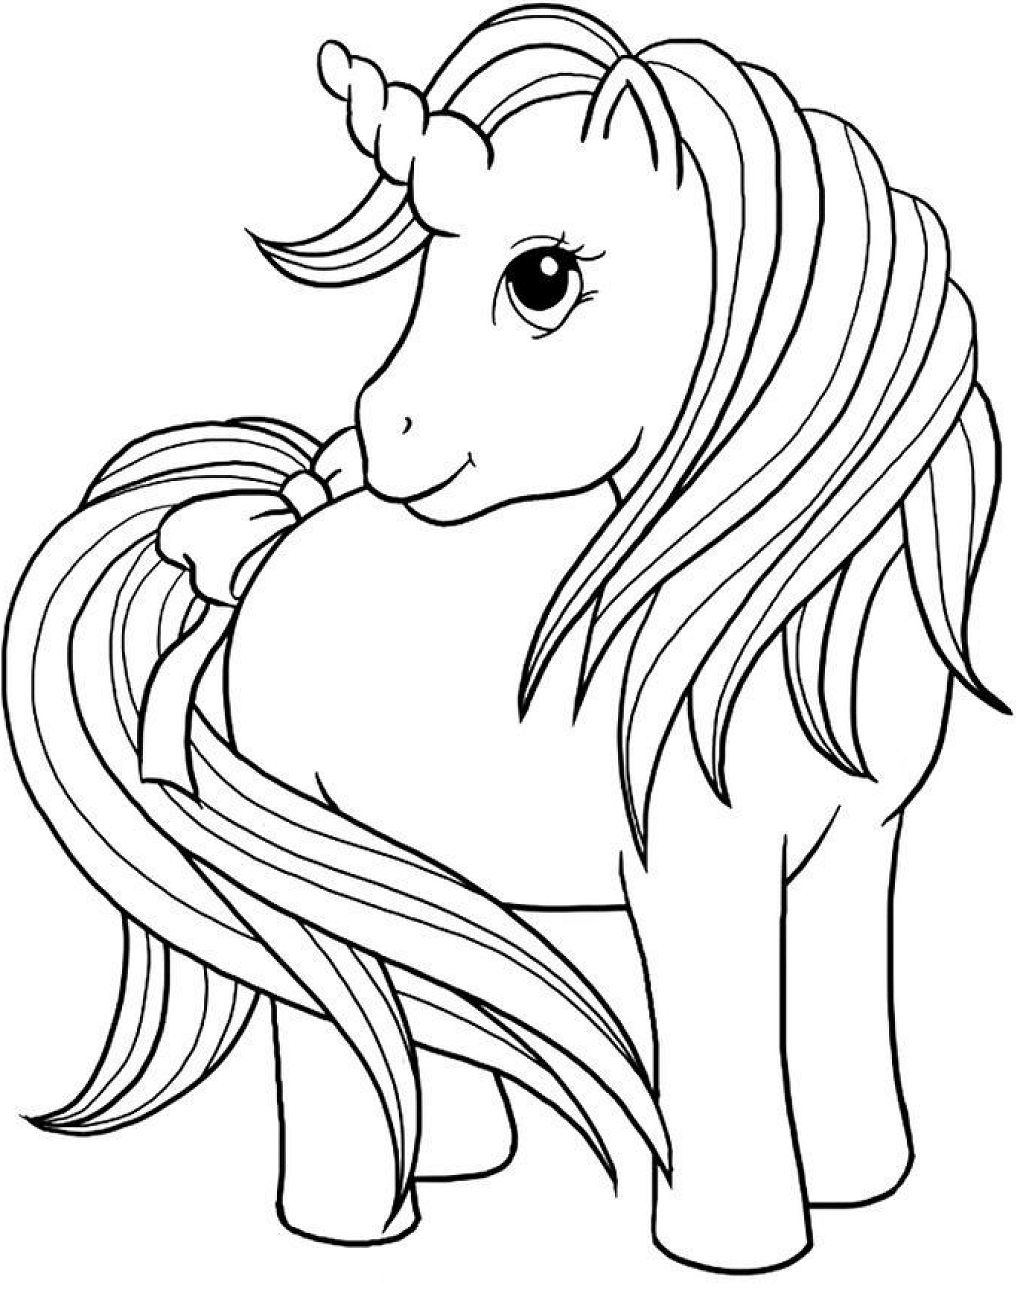 Unicorn With Bow At Tail Coloring Page - Free Printable ...